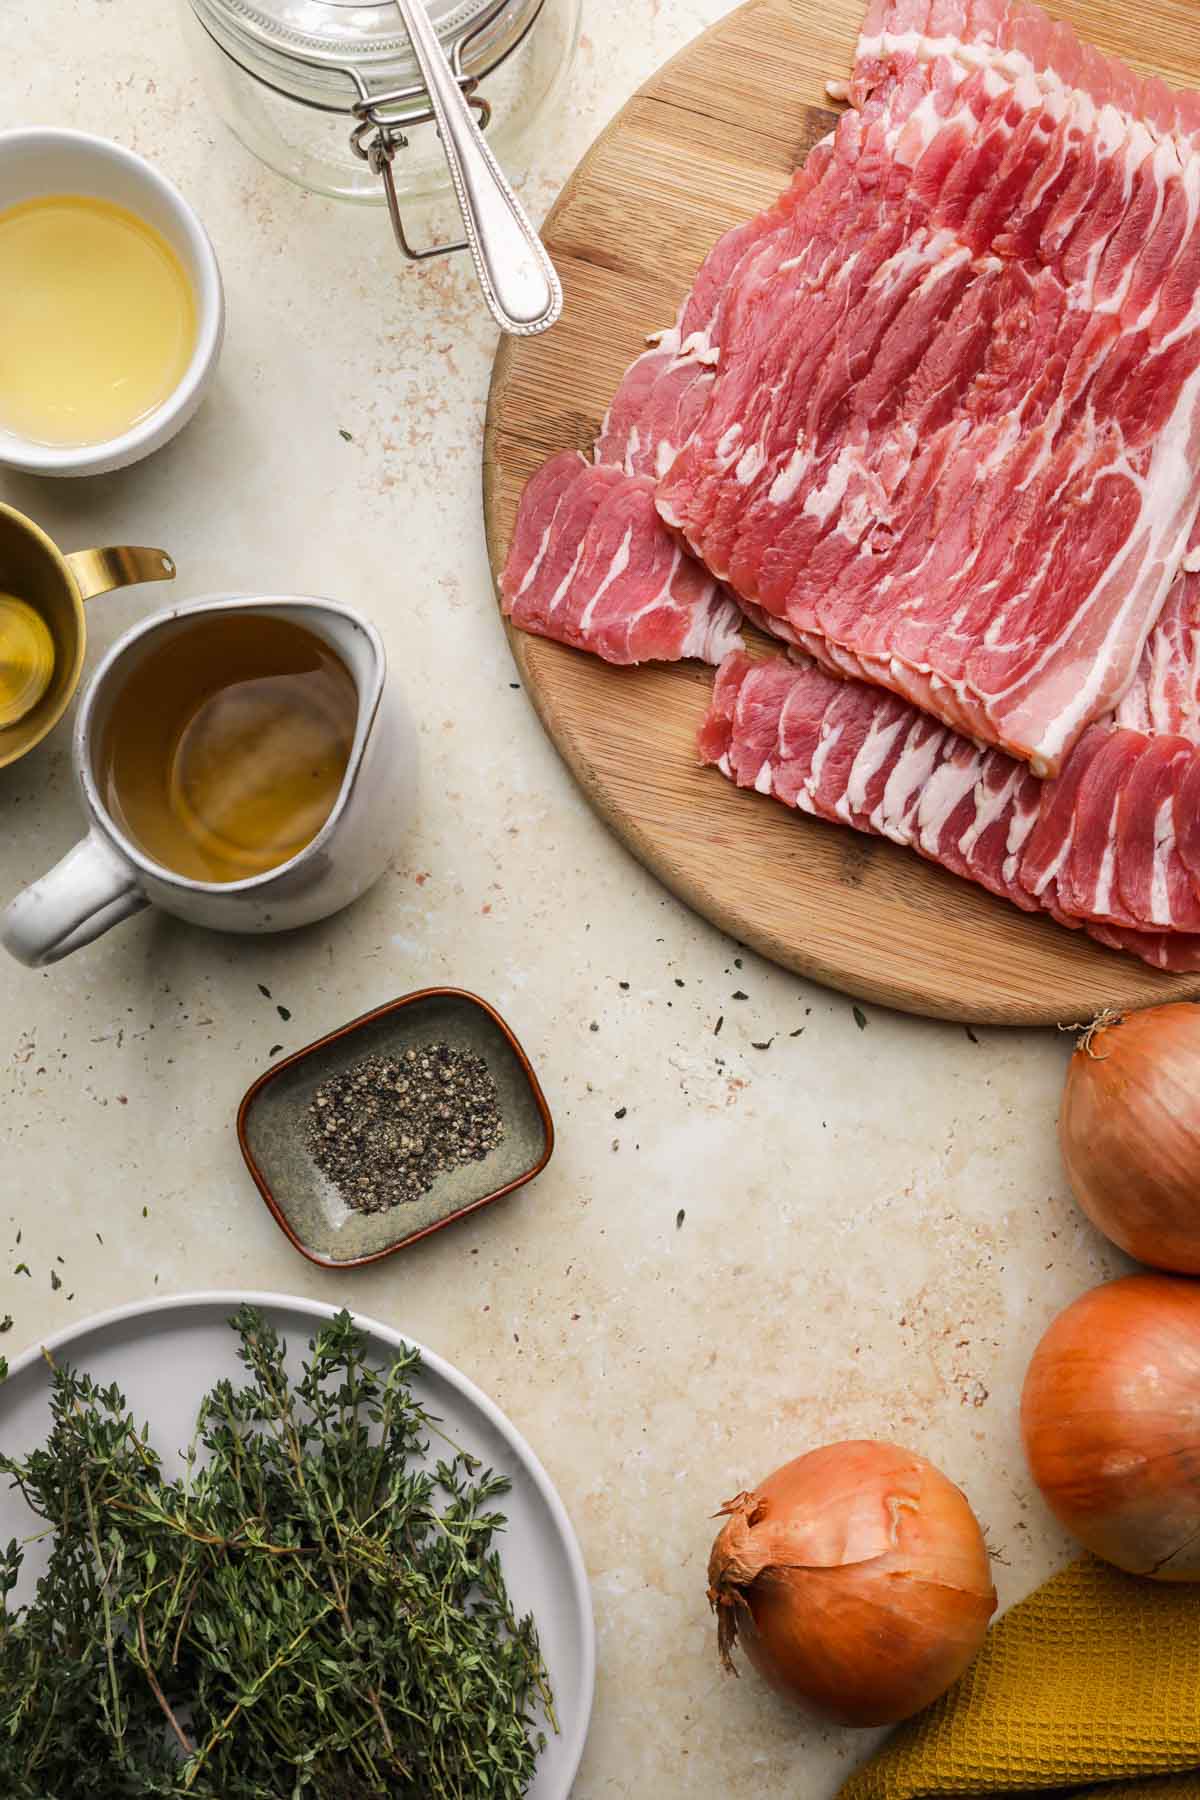 Bacon Jam ingredients in dishes and bacon on cutting board